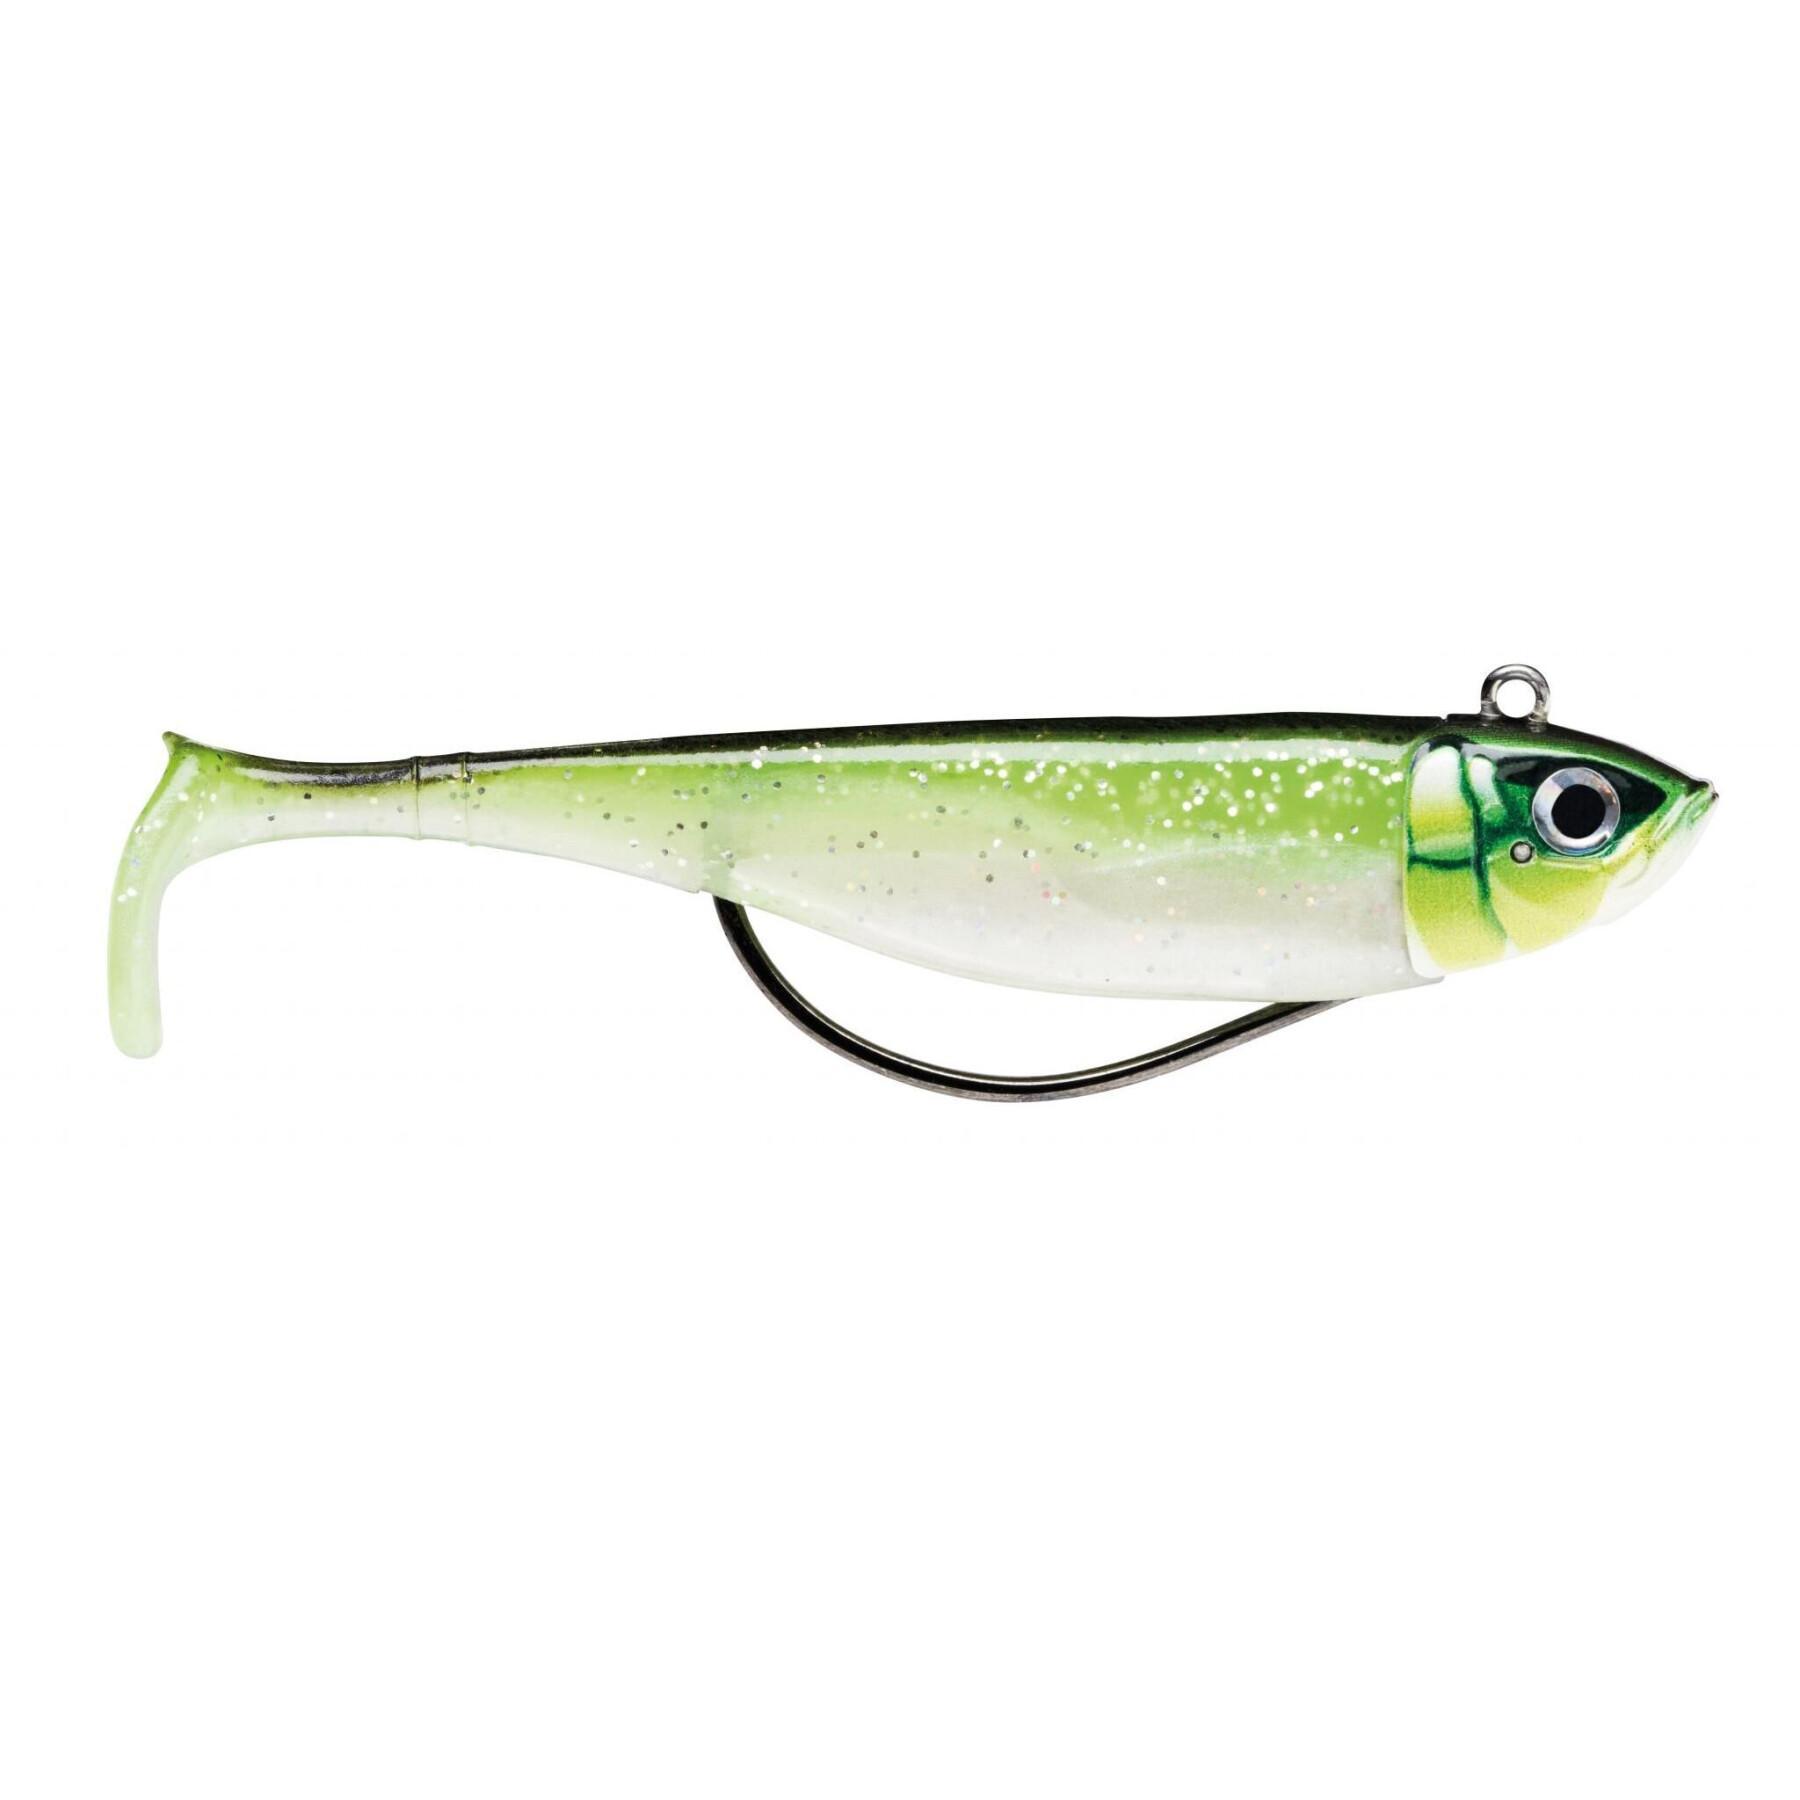 Engodos Storm Biscay Shad – 40g (x2)